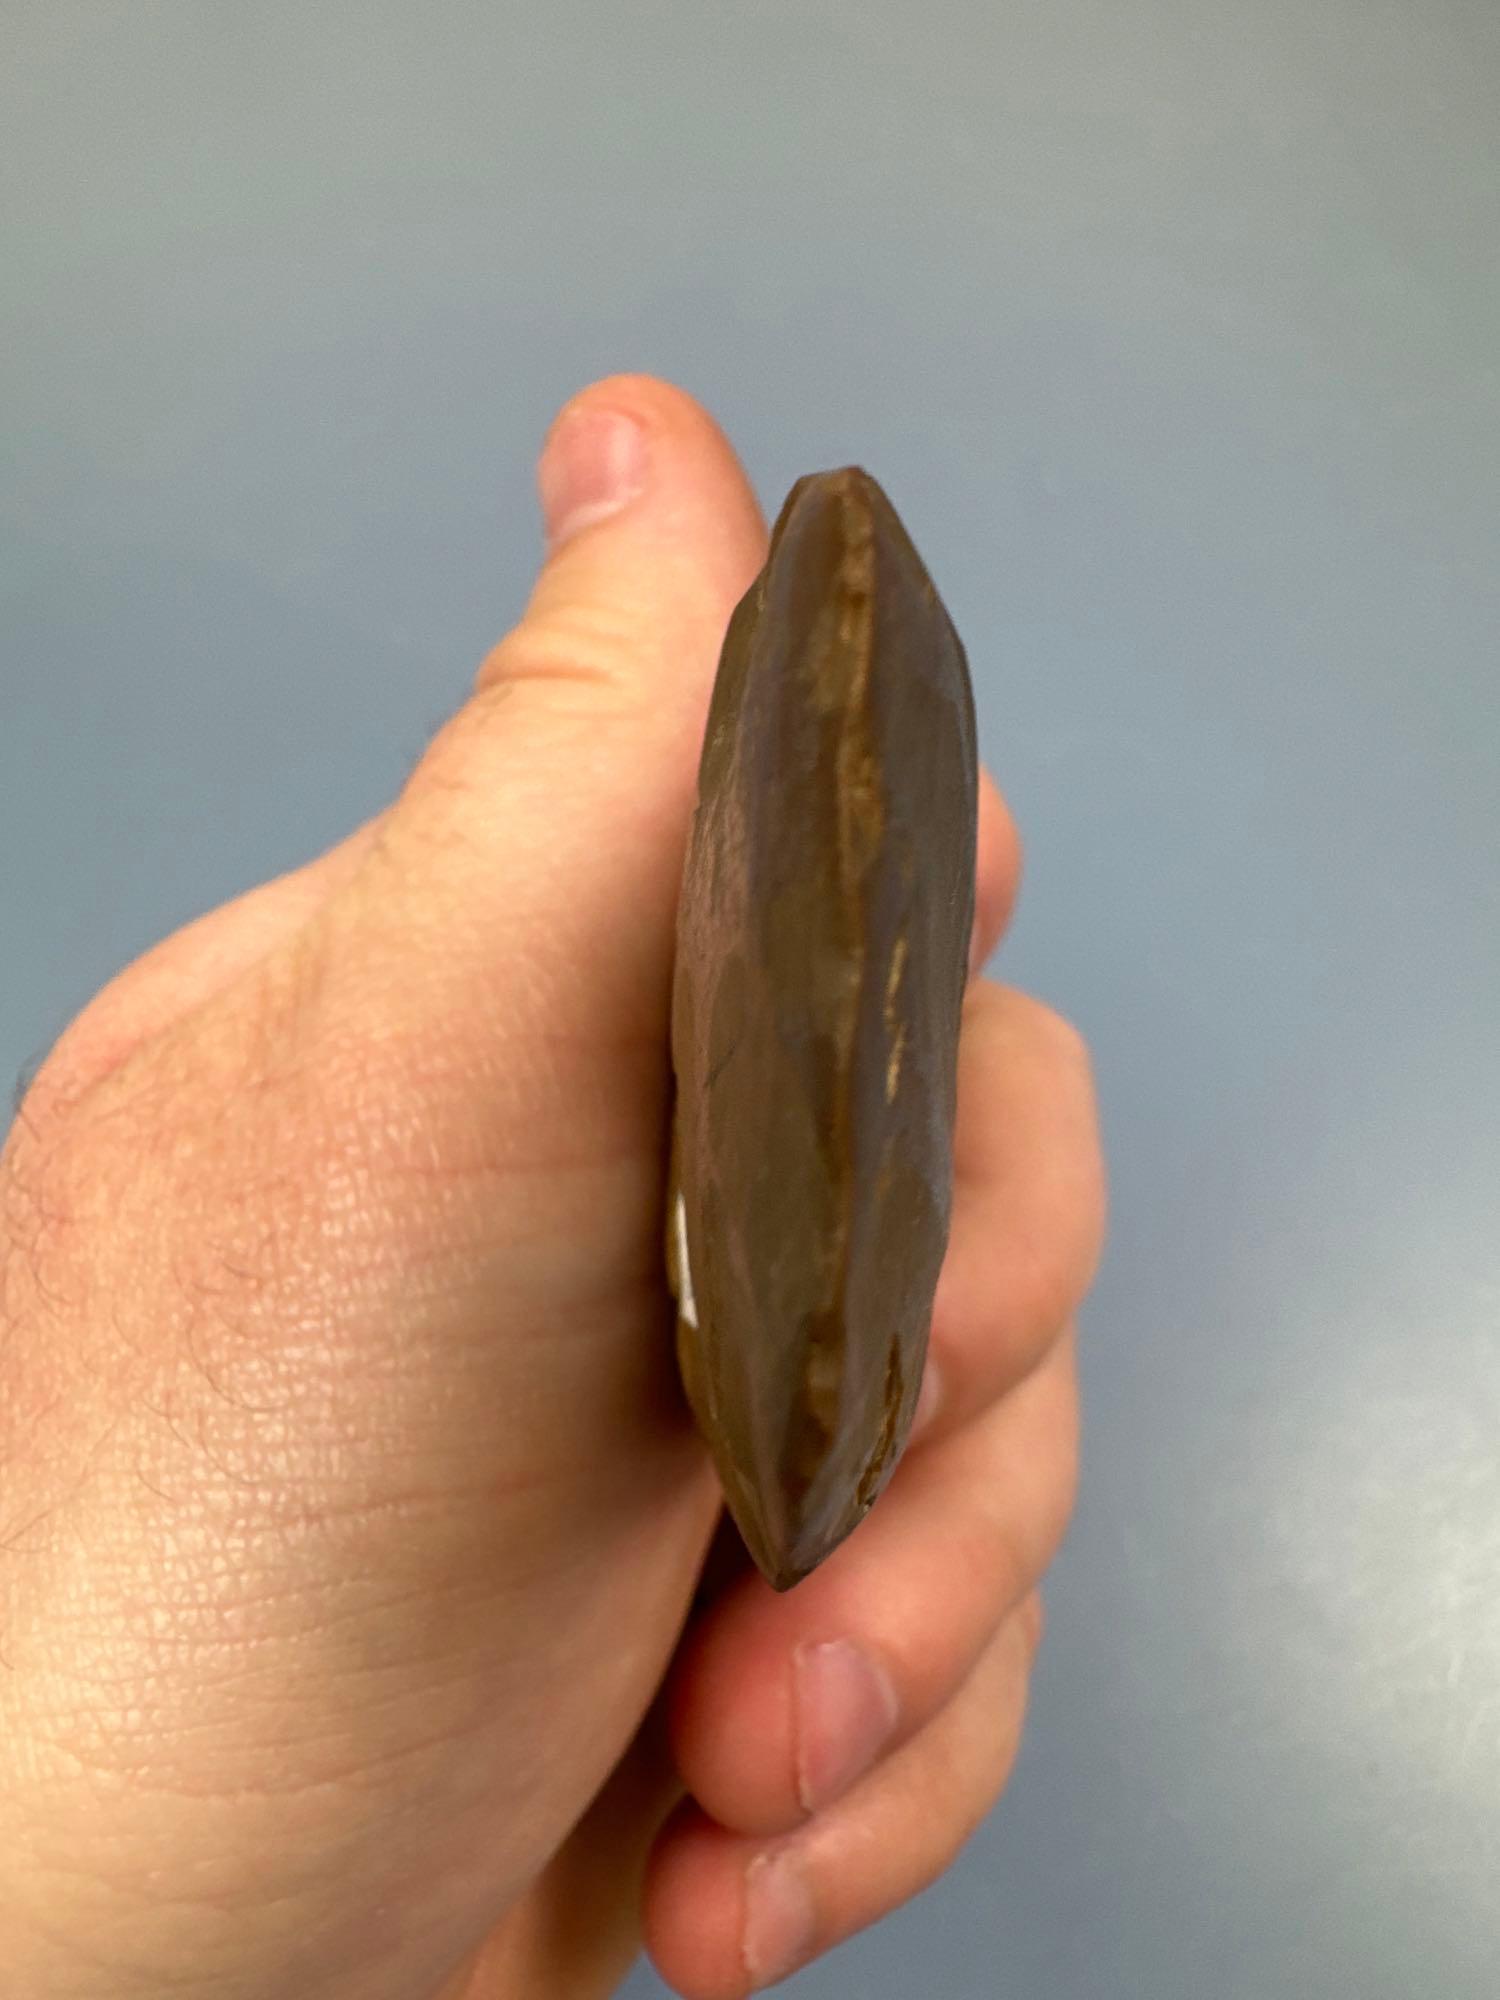 3 7/8" Knobbed Celt/Adze, Heavily Polished Bit, Made of JASPER, Found in Lancaster Co., PA, Ex: Holl